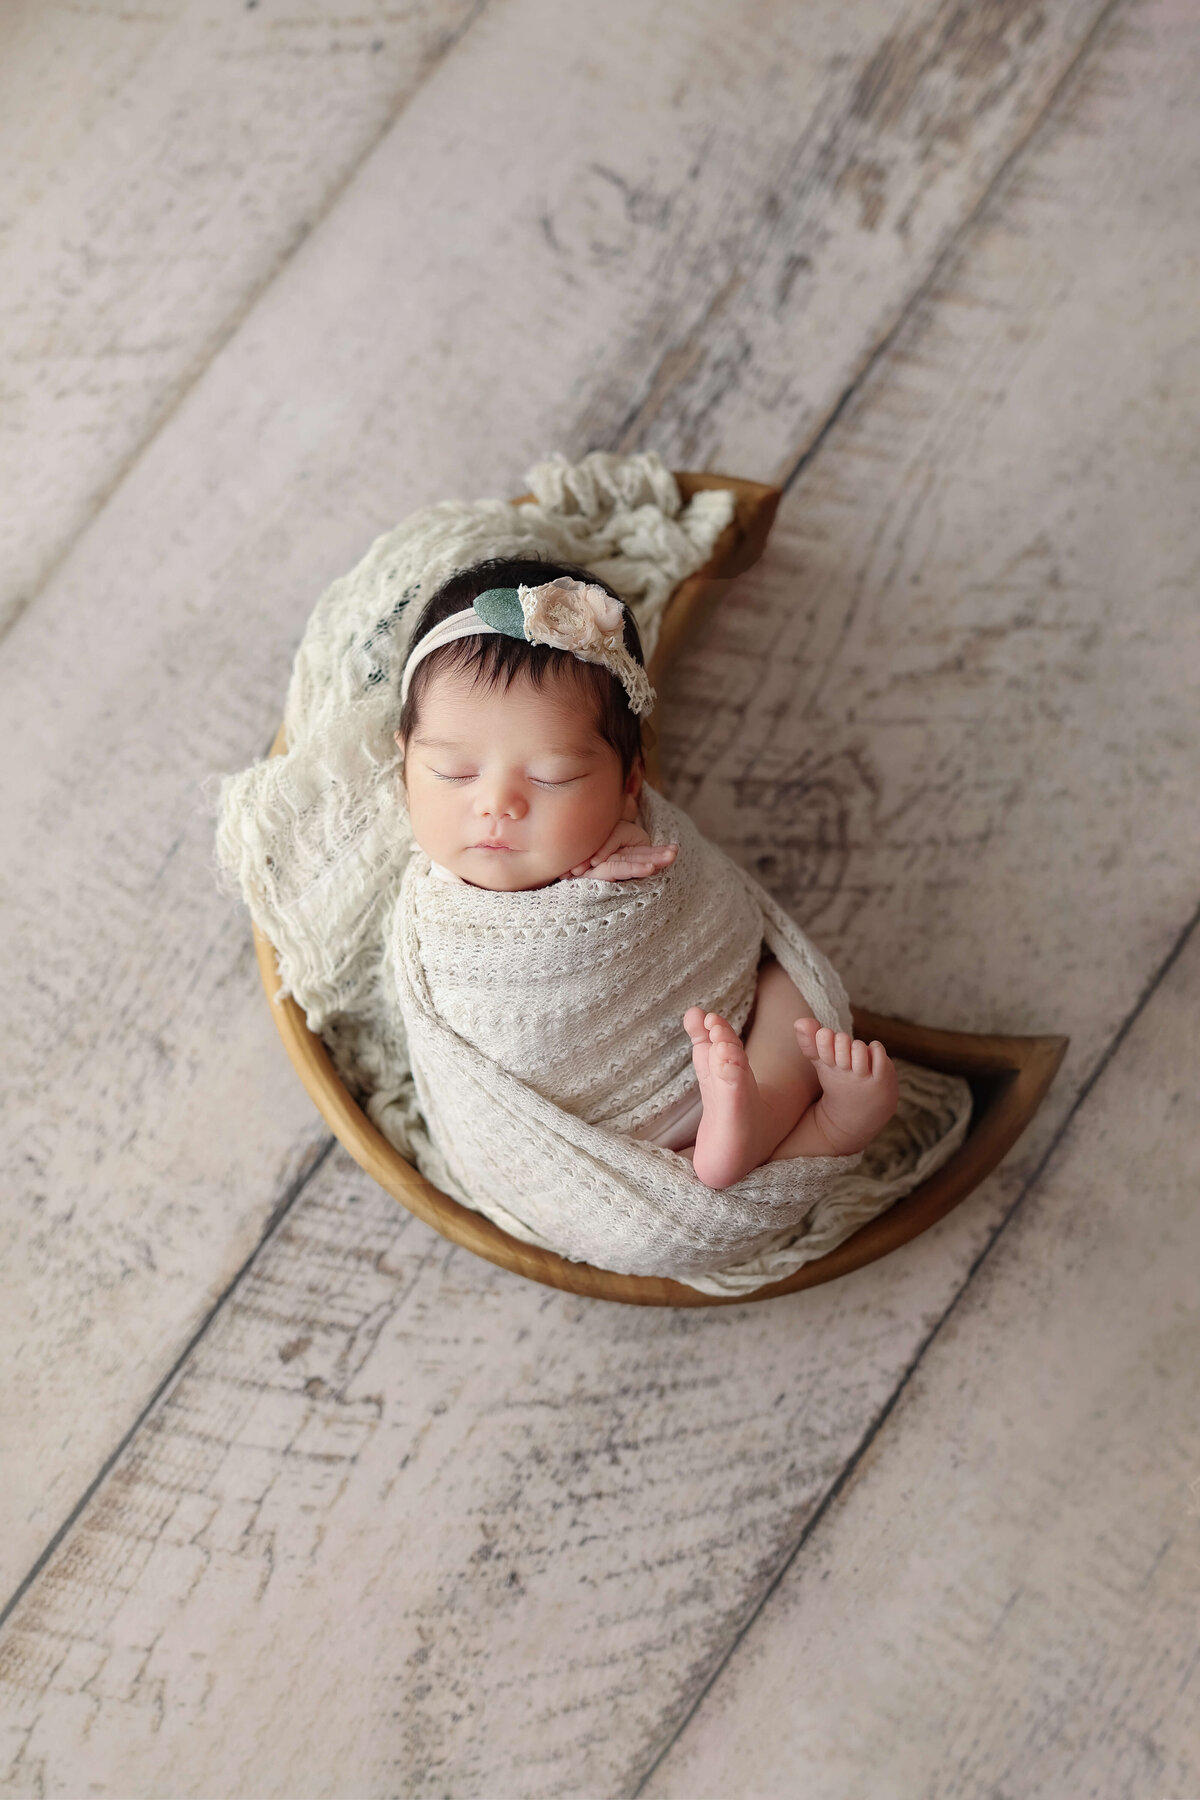 baby girl in a white swaddle laying in a moon shaped wooden bowl on a white wood floor